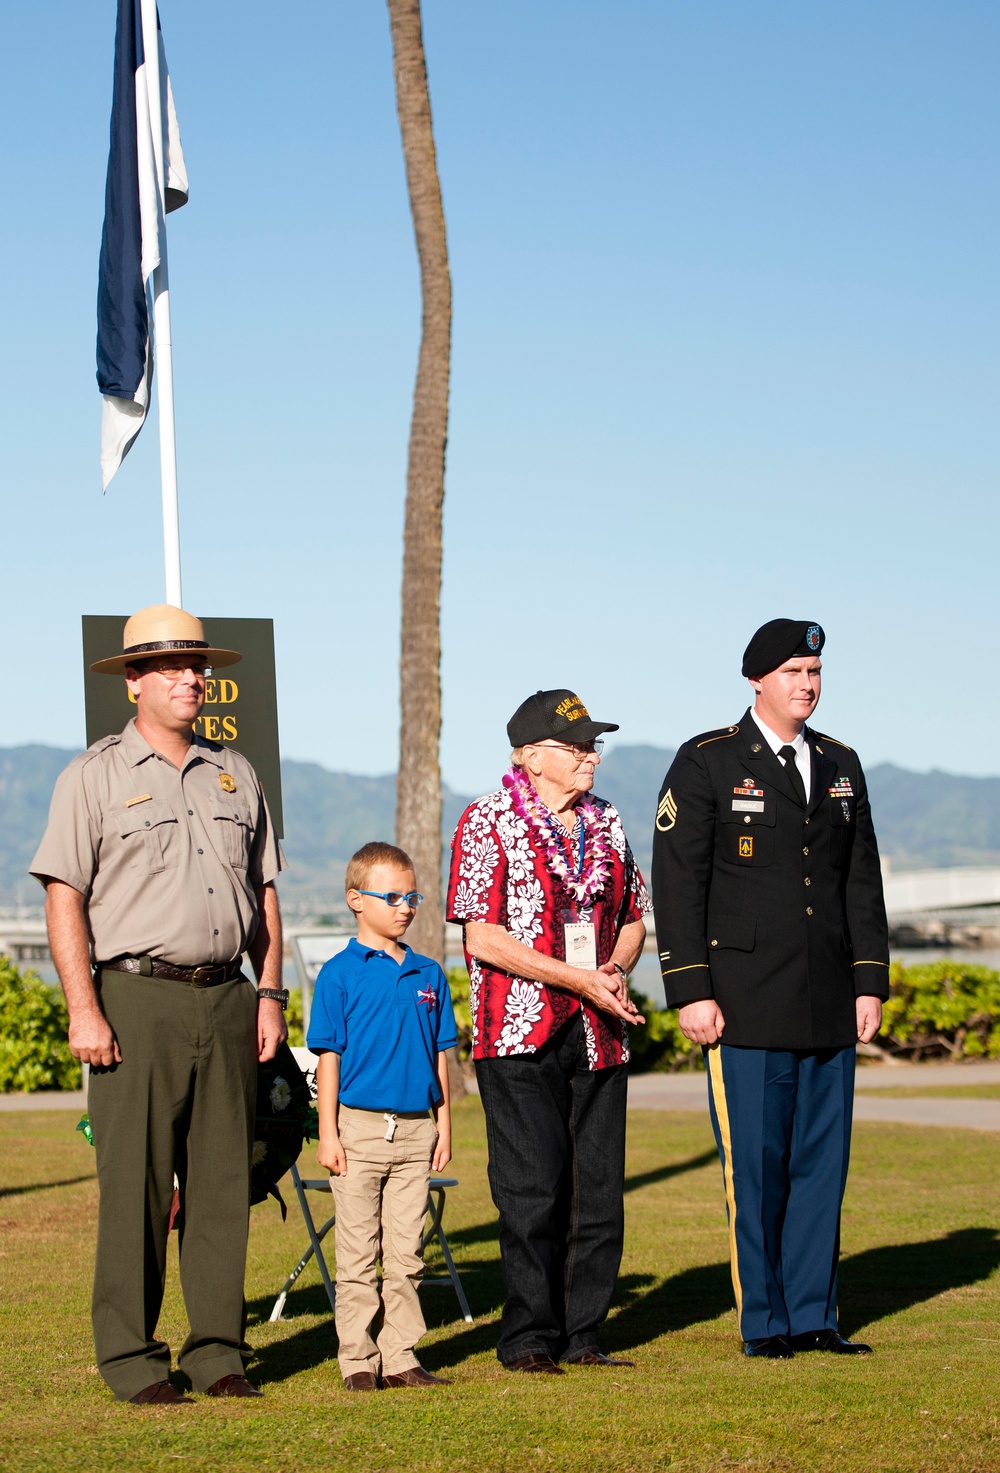 Services come together in a joint commemoration ceremony for 73rd anniversary of Pearl Harbor